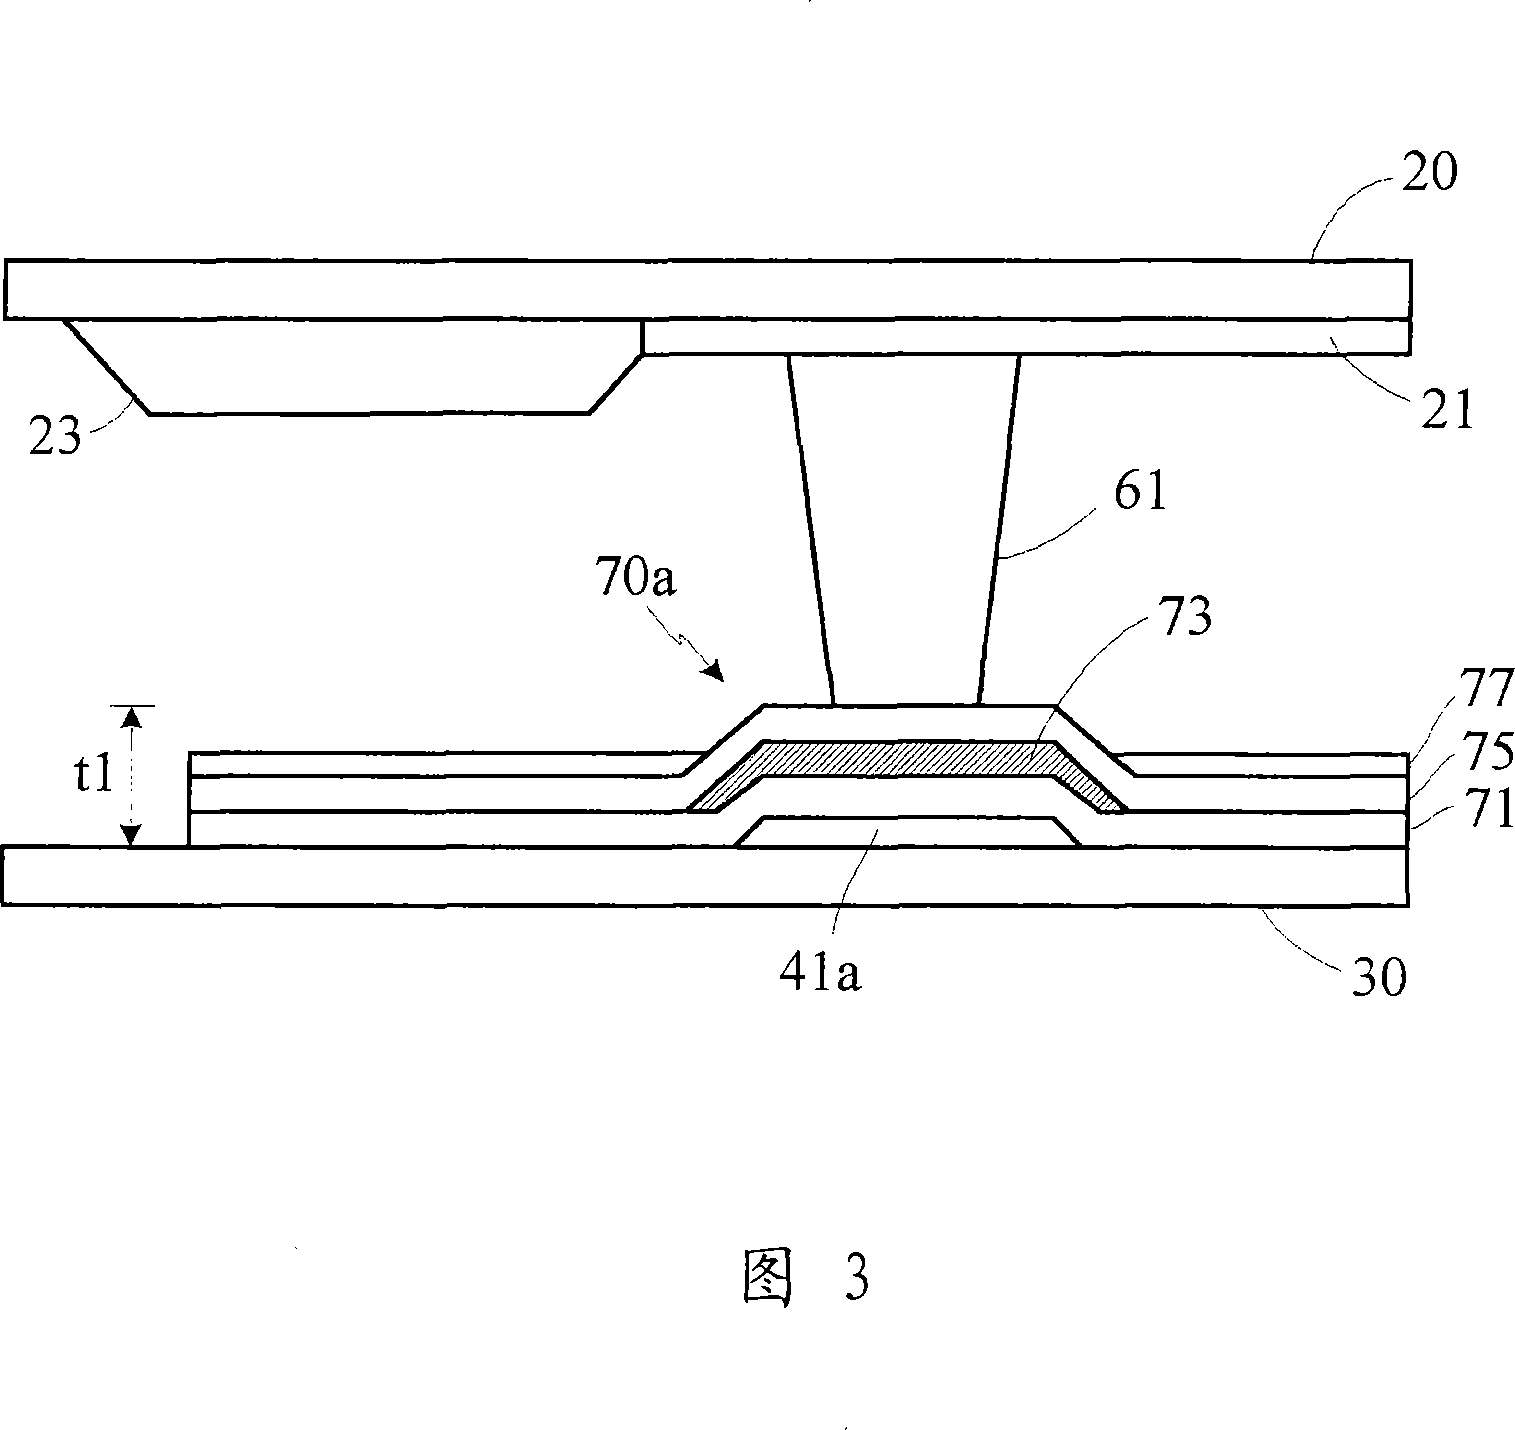 Liquid crystal display and support structure